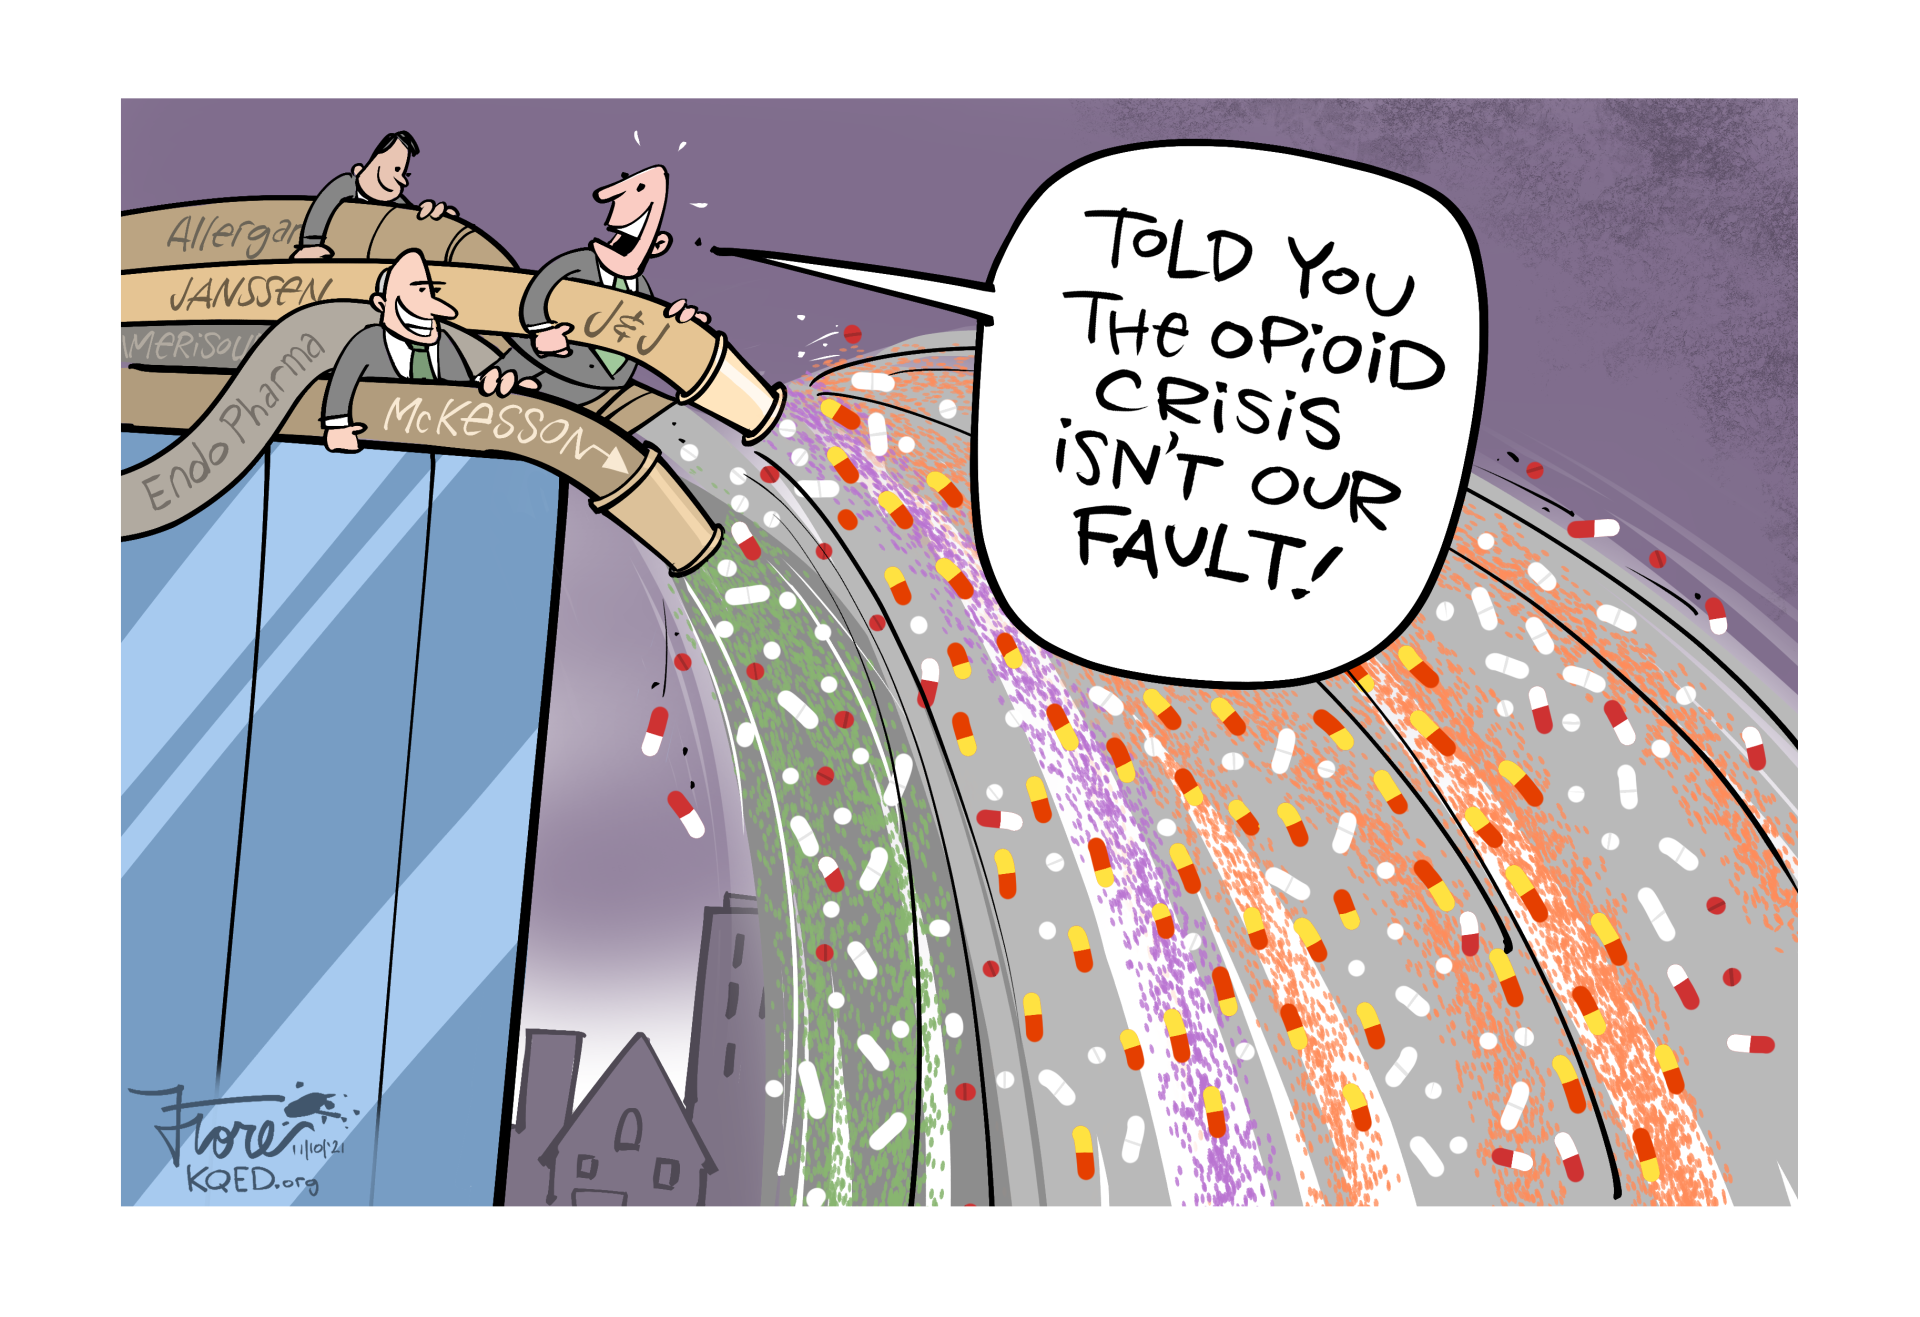 Cartoon: Drug companies and distributors like J&J and McKesson shown spraying huge hoses of opioids over a city while the J&J character says, "told you the opioid crisis isn't our fault!"